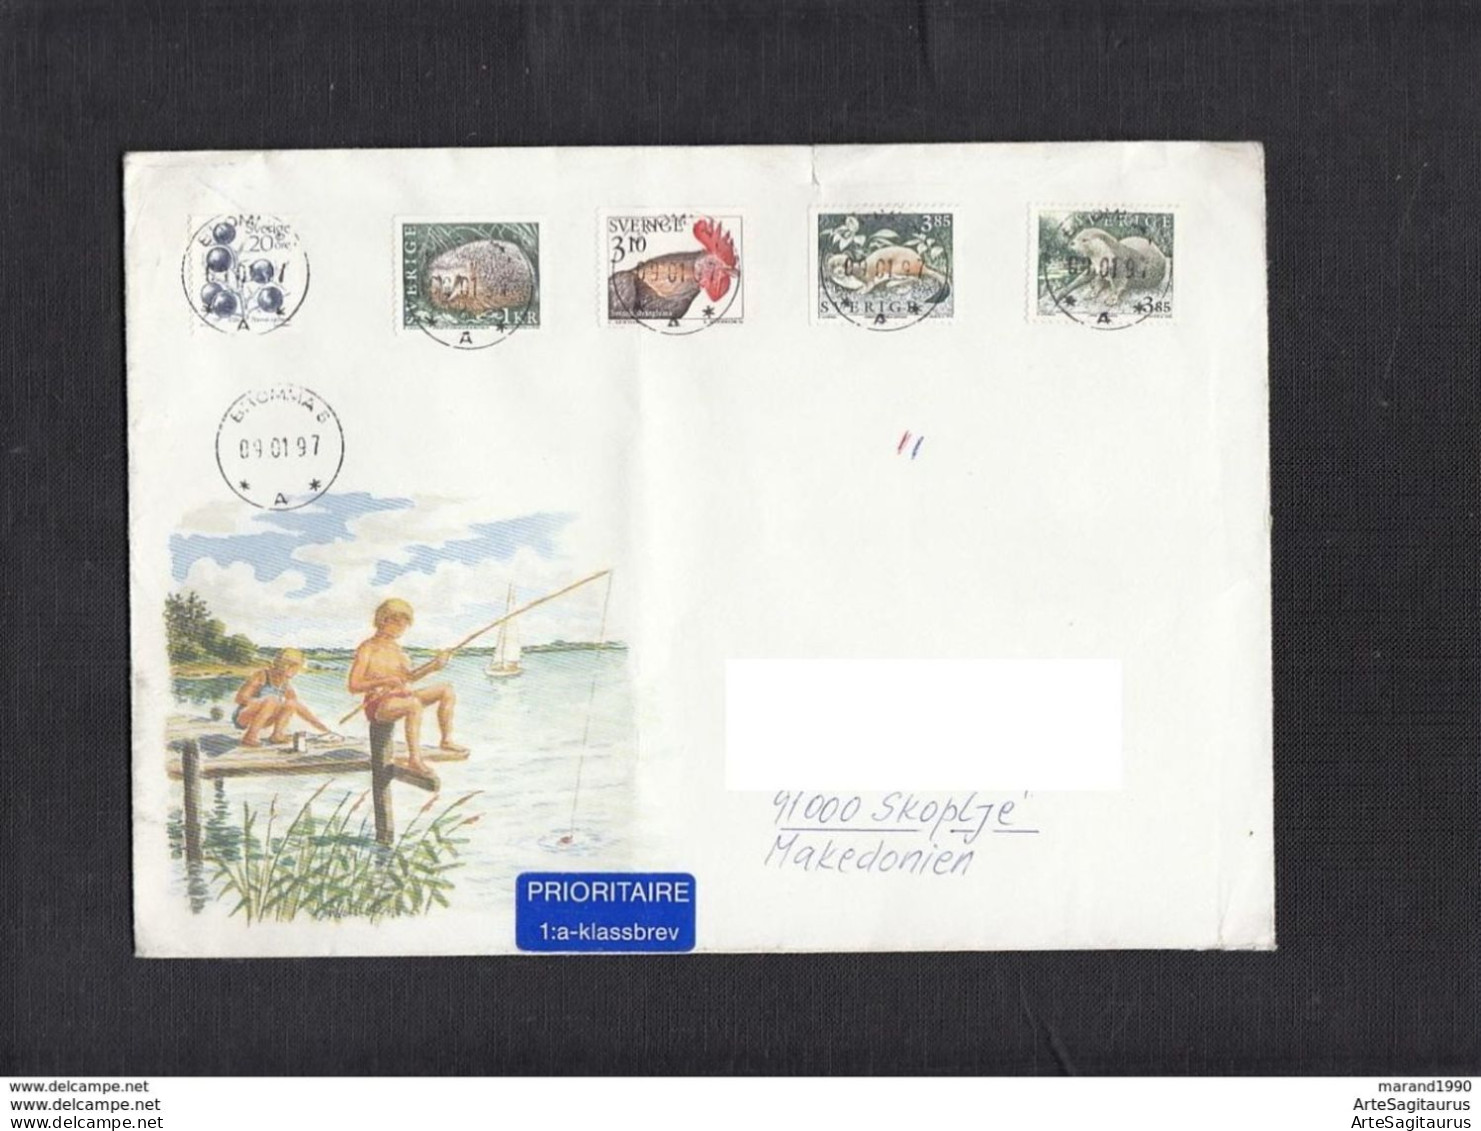 SWEDEN, COVER, BIRDS, ANIMALS, BEARS, REPUBLIC OF MACEDONIA  (008) - Covers & Documents